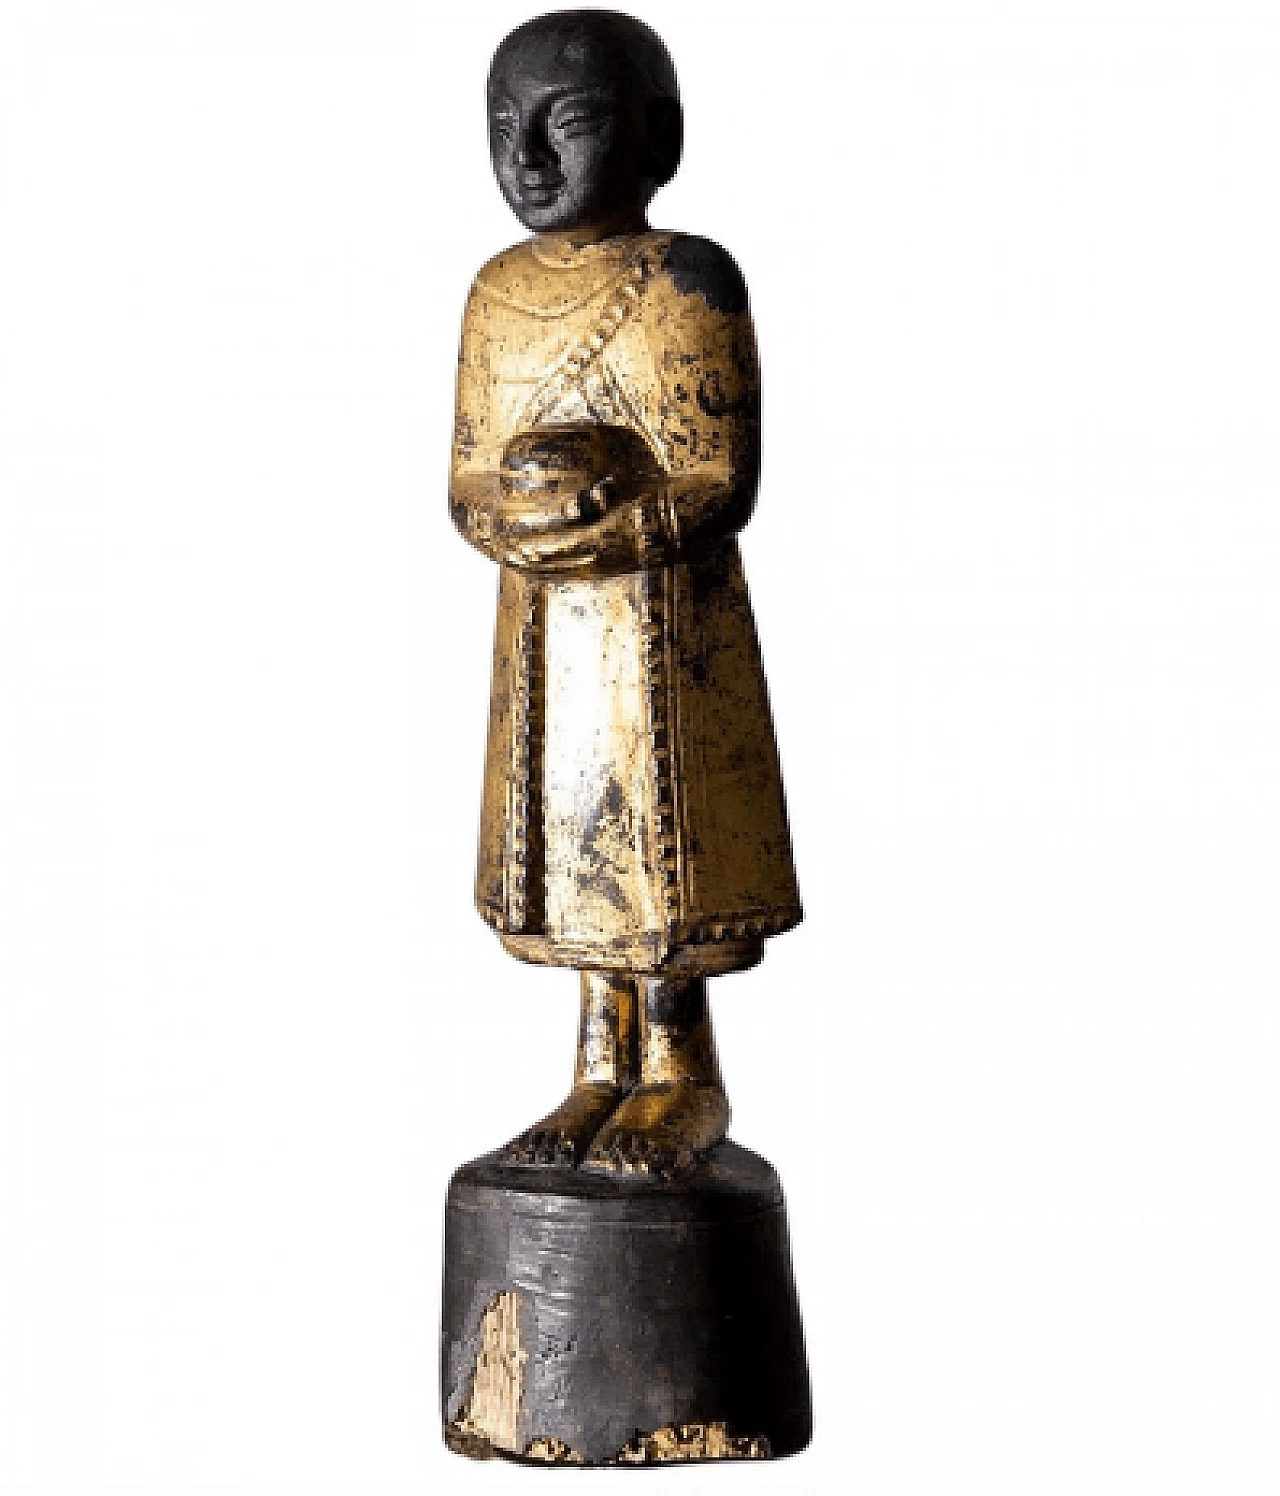 Burmese water-carrying Buddha, lacquered wood sculpture, 19th century 1